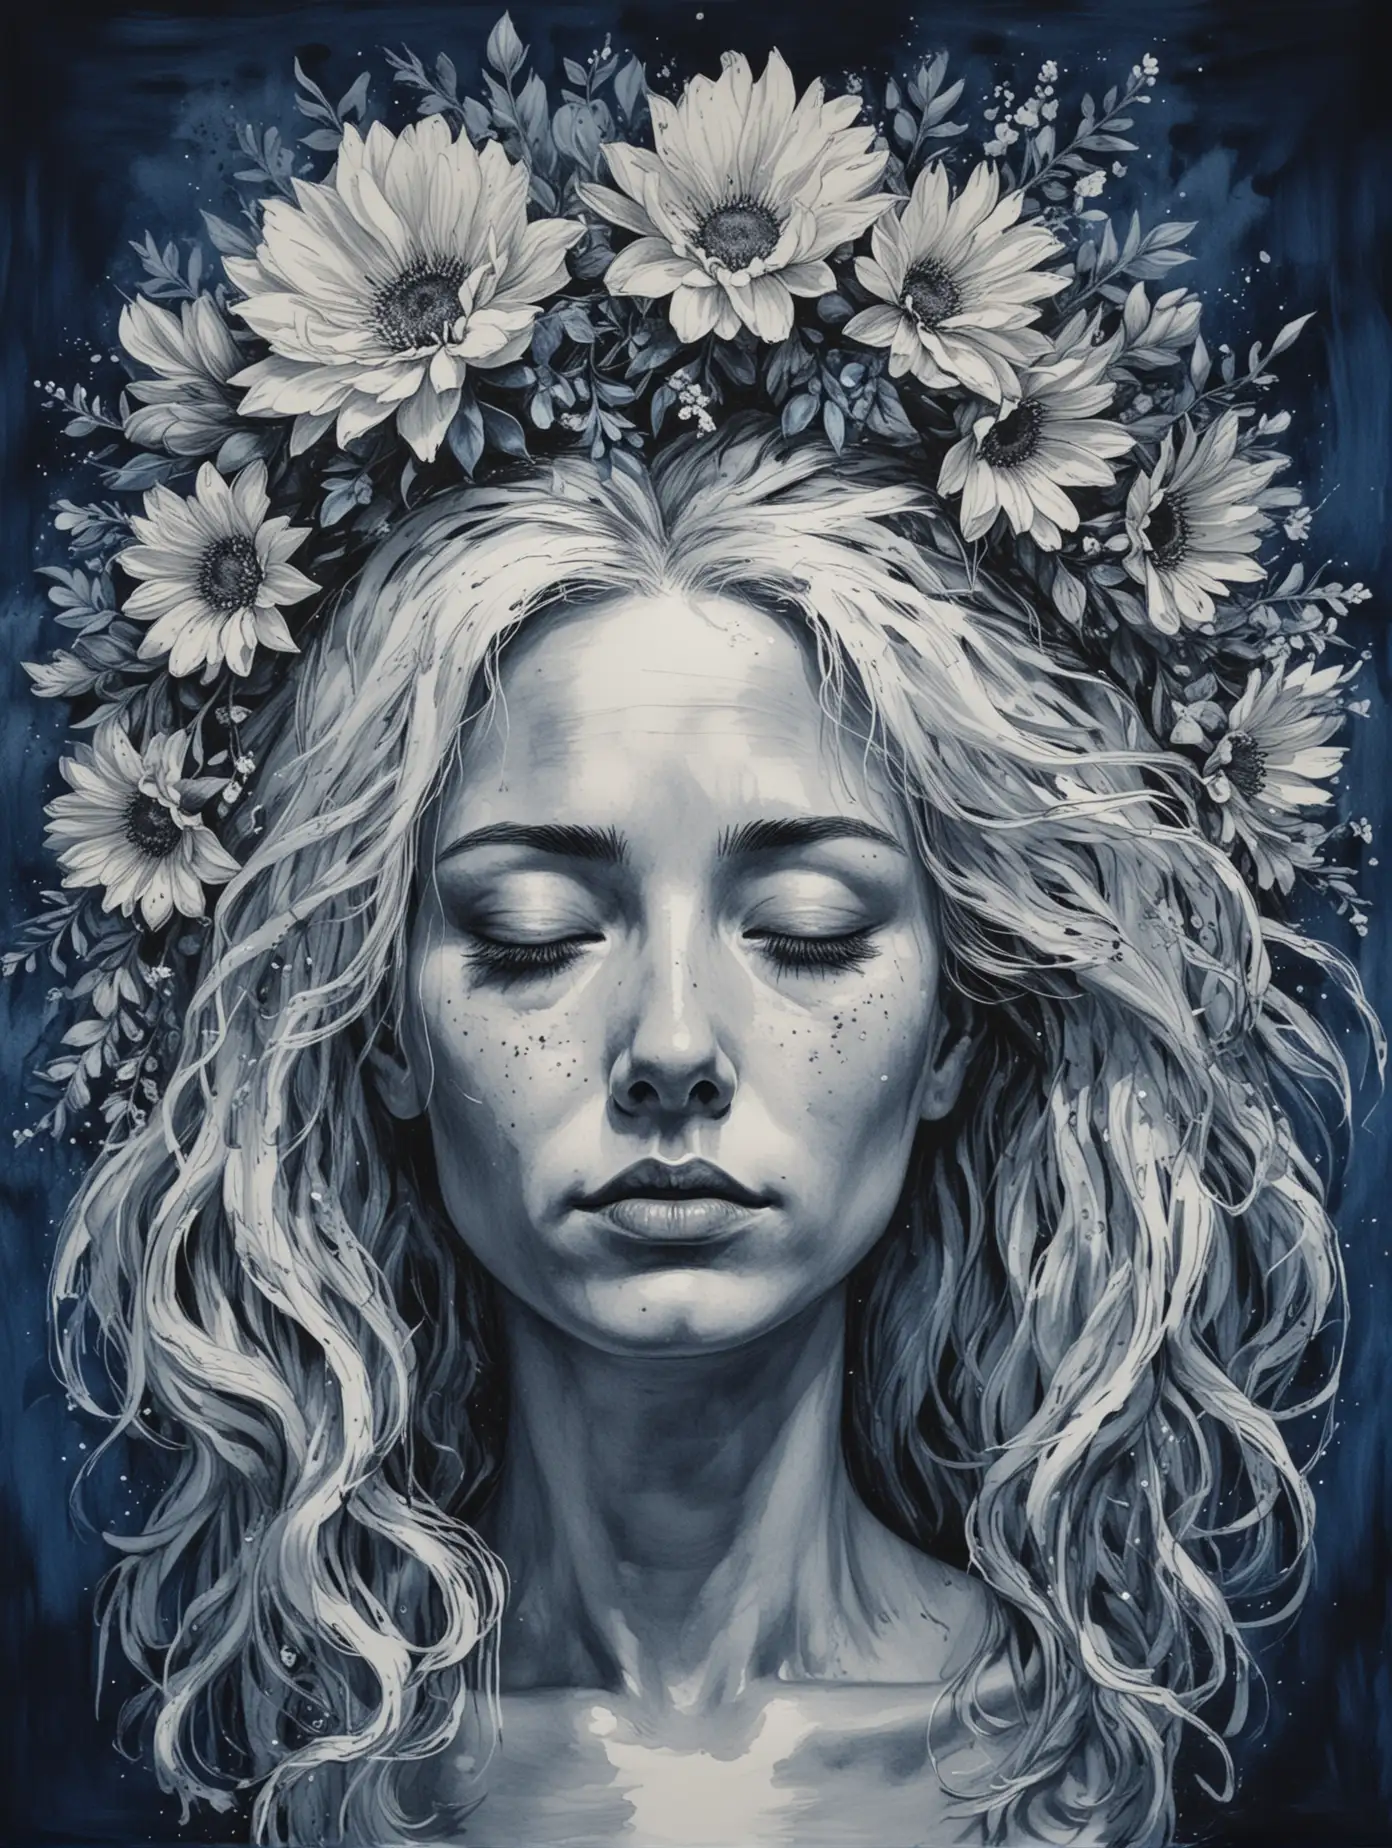 impressionistic ink drawing of a woman's face in a state of deep depression on a blue back ground, with a wreath of flowers on her head with white hair.  